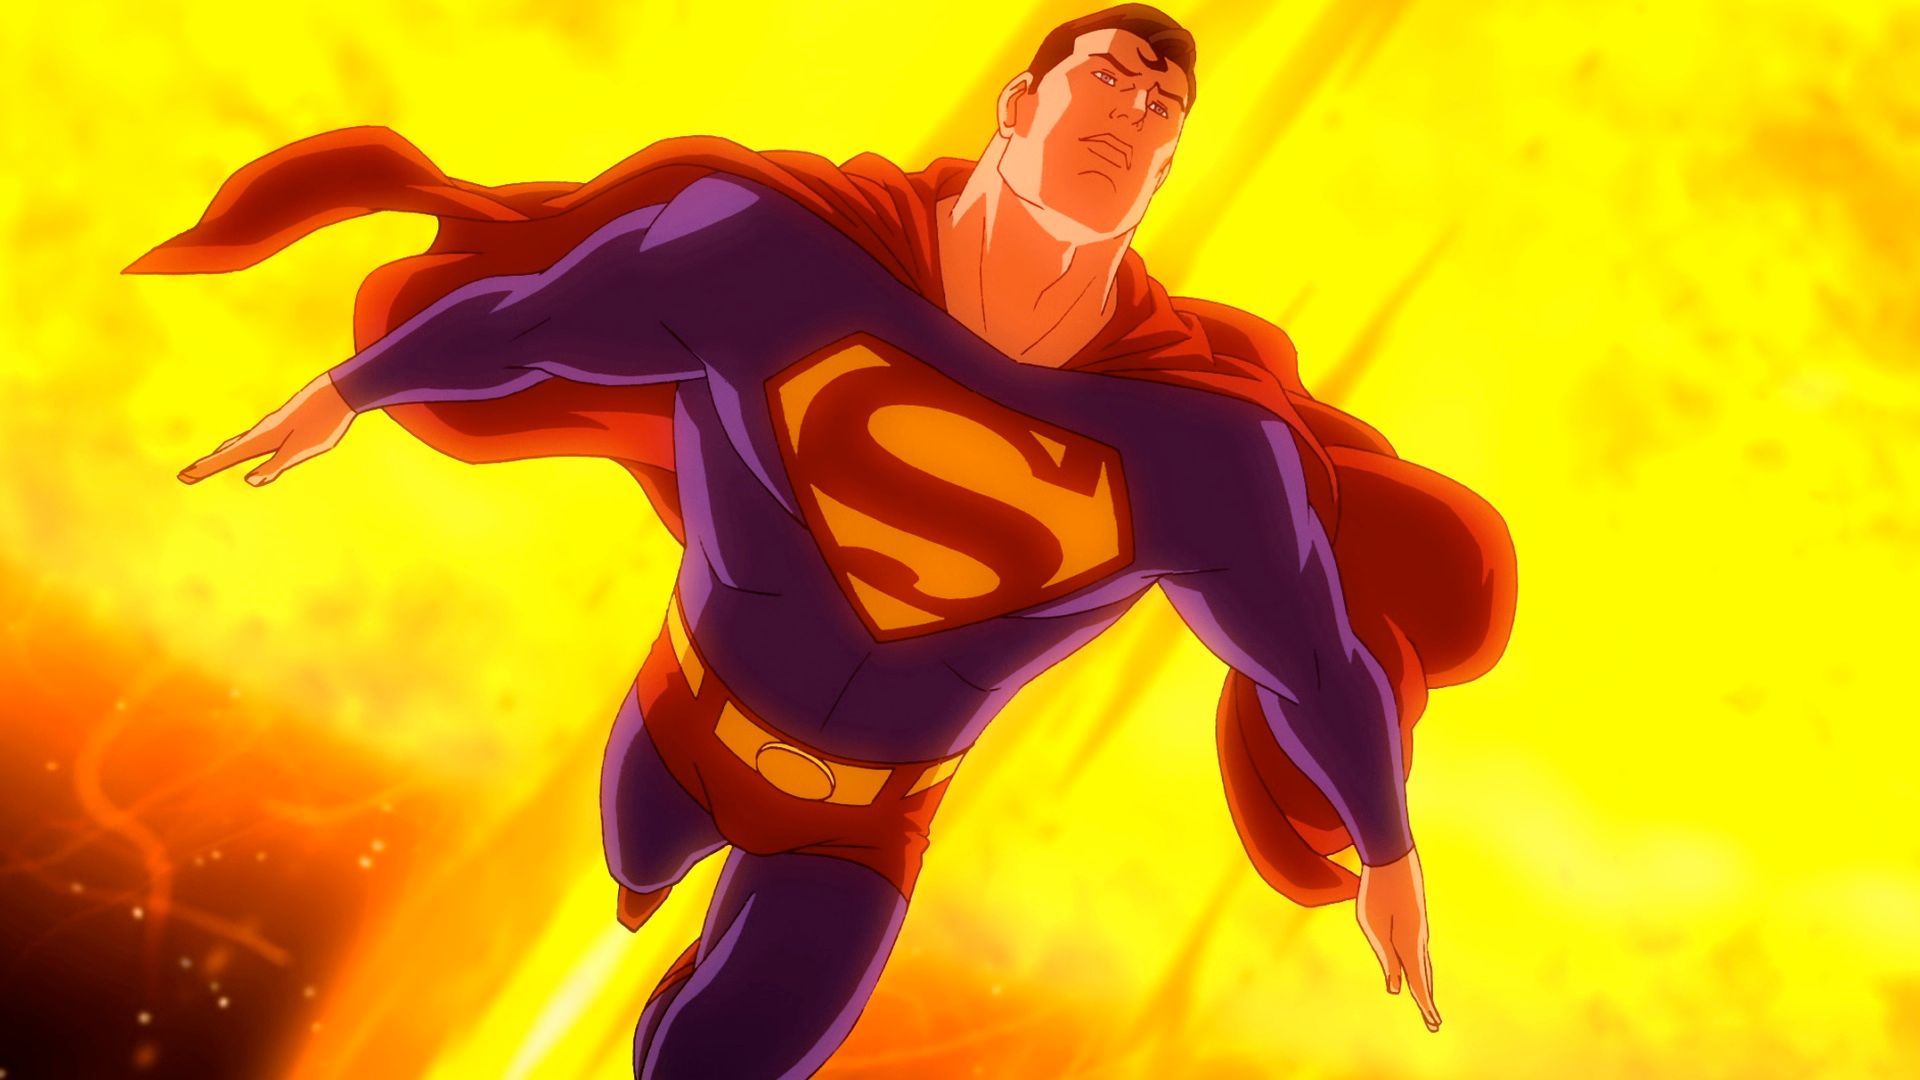 All-Star Superman background